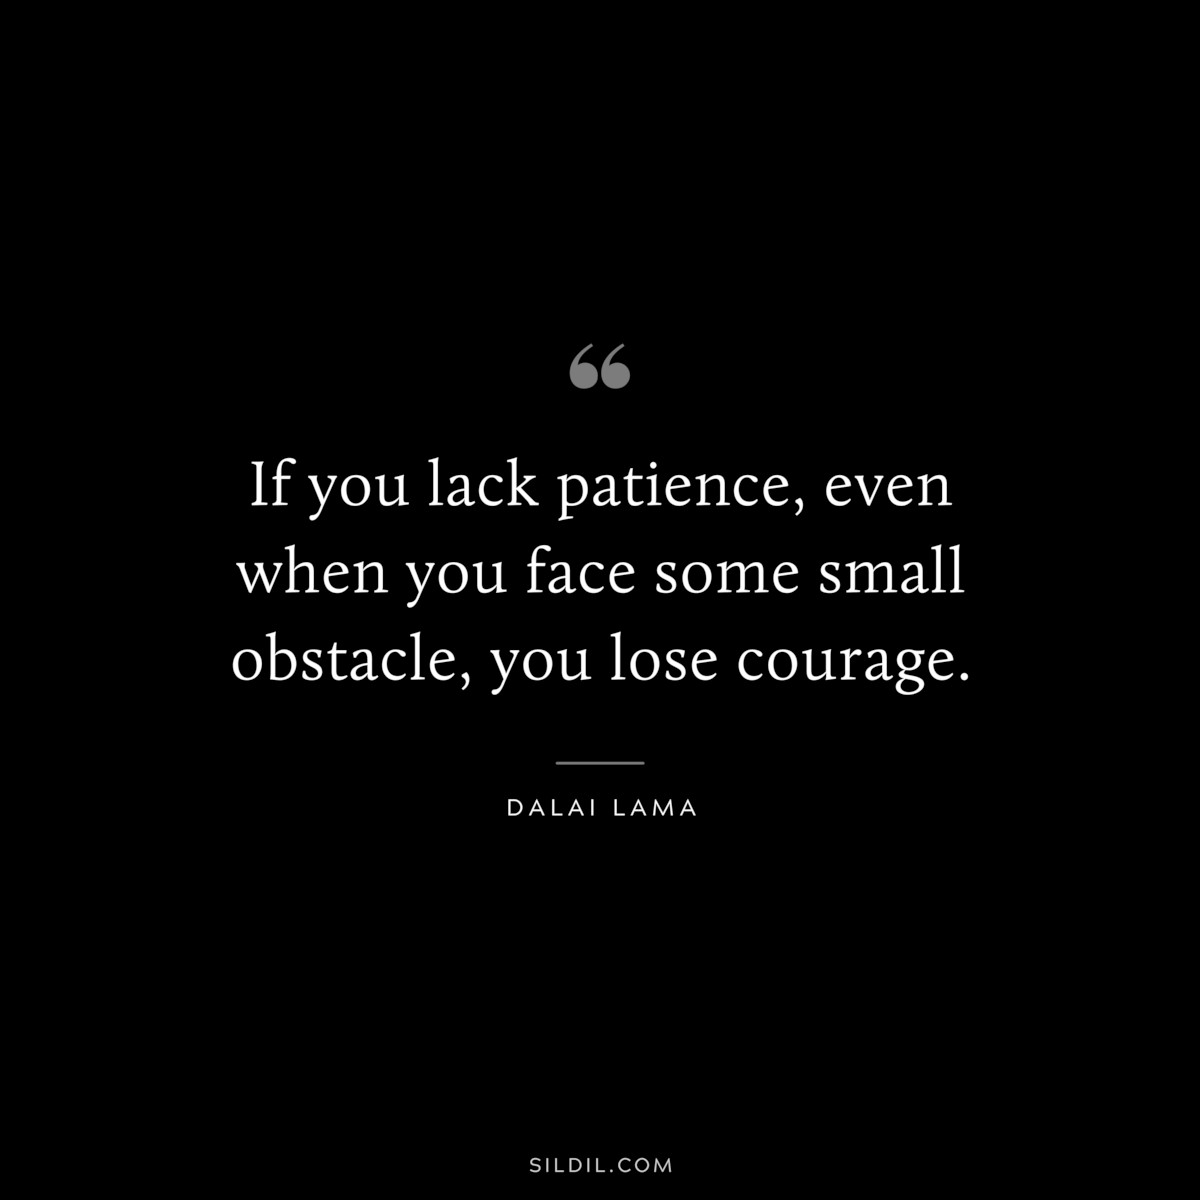 If you lack patience, even when you face some small obstacle, you lose courage. ― Dalai Lama